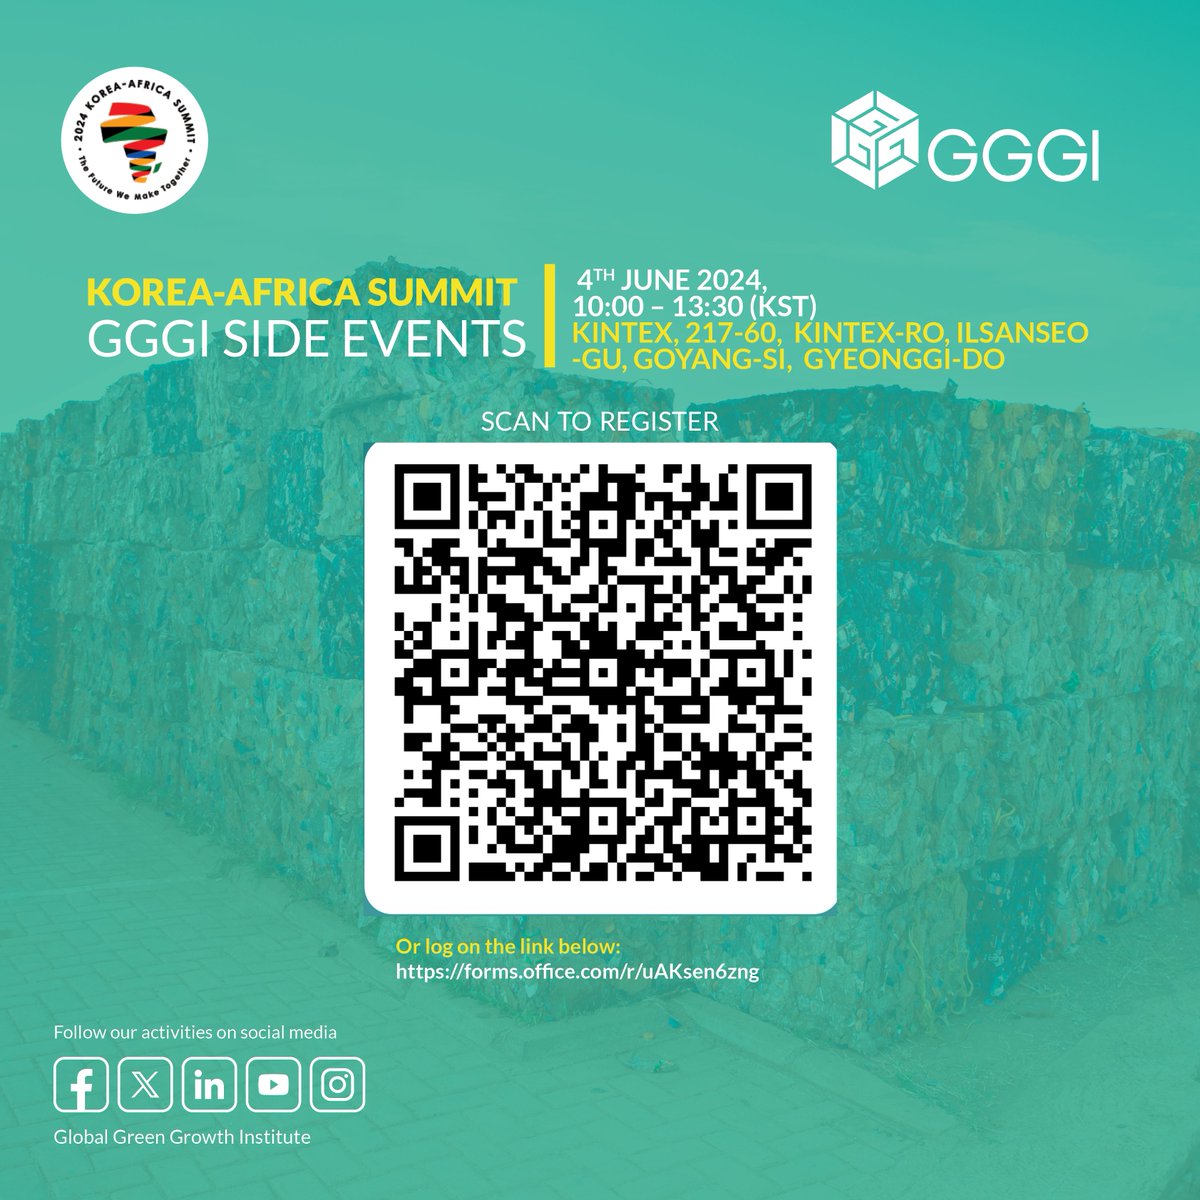 At the Korea-Africa Summit 2024 @GGGI_hq will host 2 Forums that will offer a platform to explore new opportunities for #GreenGrowth, #climateFinance and plastics sustainability in #Africa. 

Scan the QR Code to register or follow the link: forms.office.com/r/uAKsen6zng